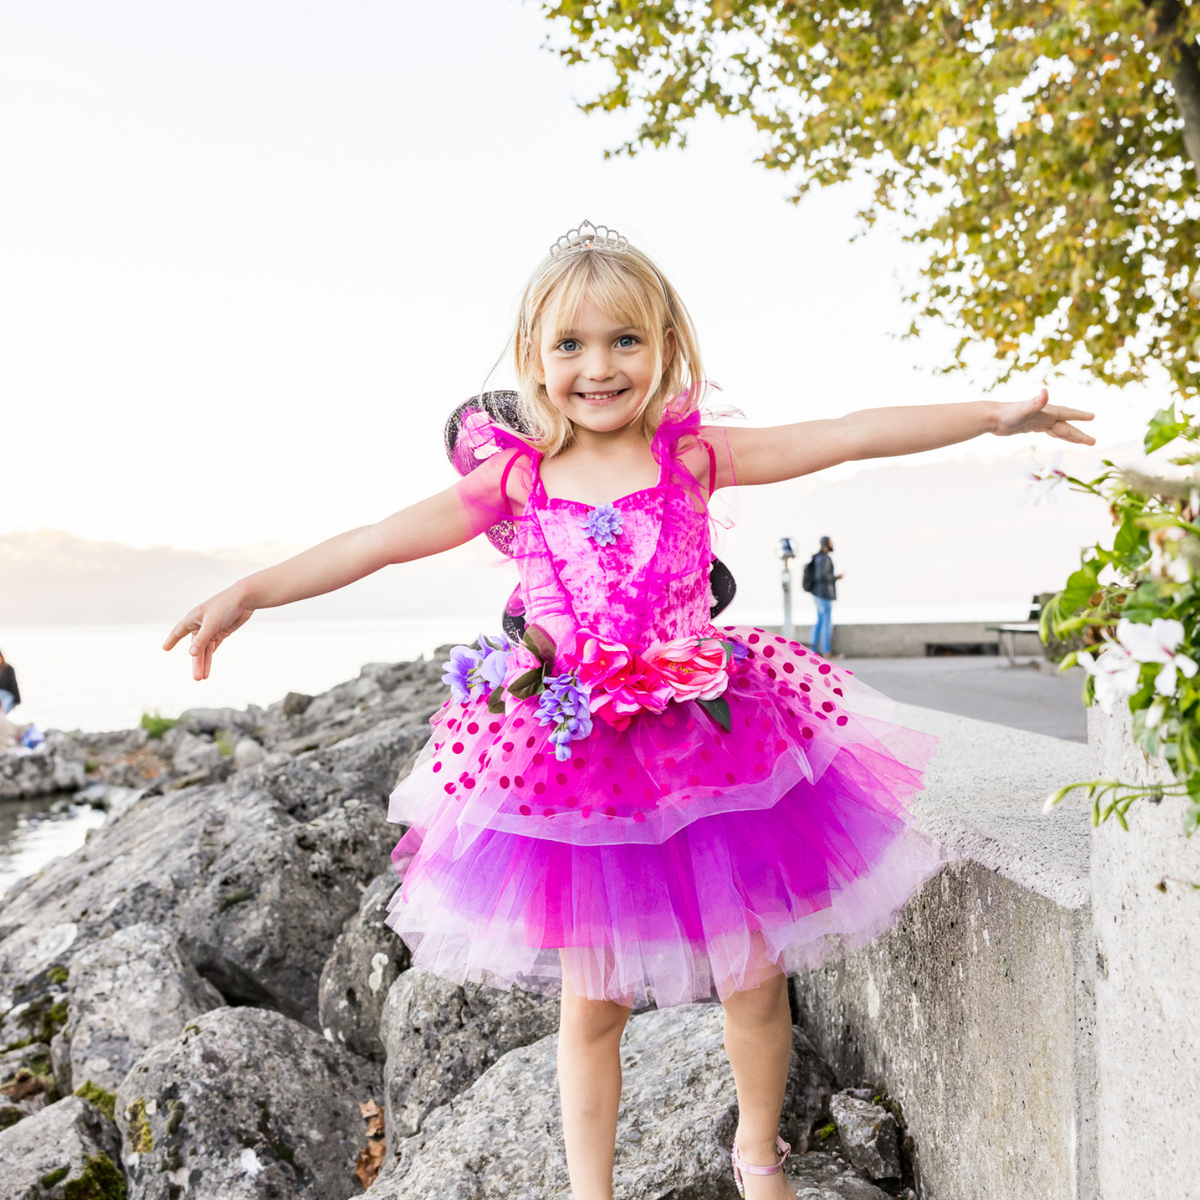 Womens Pink Fairy Dress (Large/X-Large) - 1 Pc. - Enchanting Design,  Perfect For Costumes, Themed Parties & Magical Moments